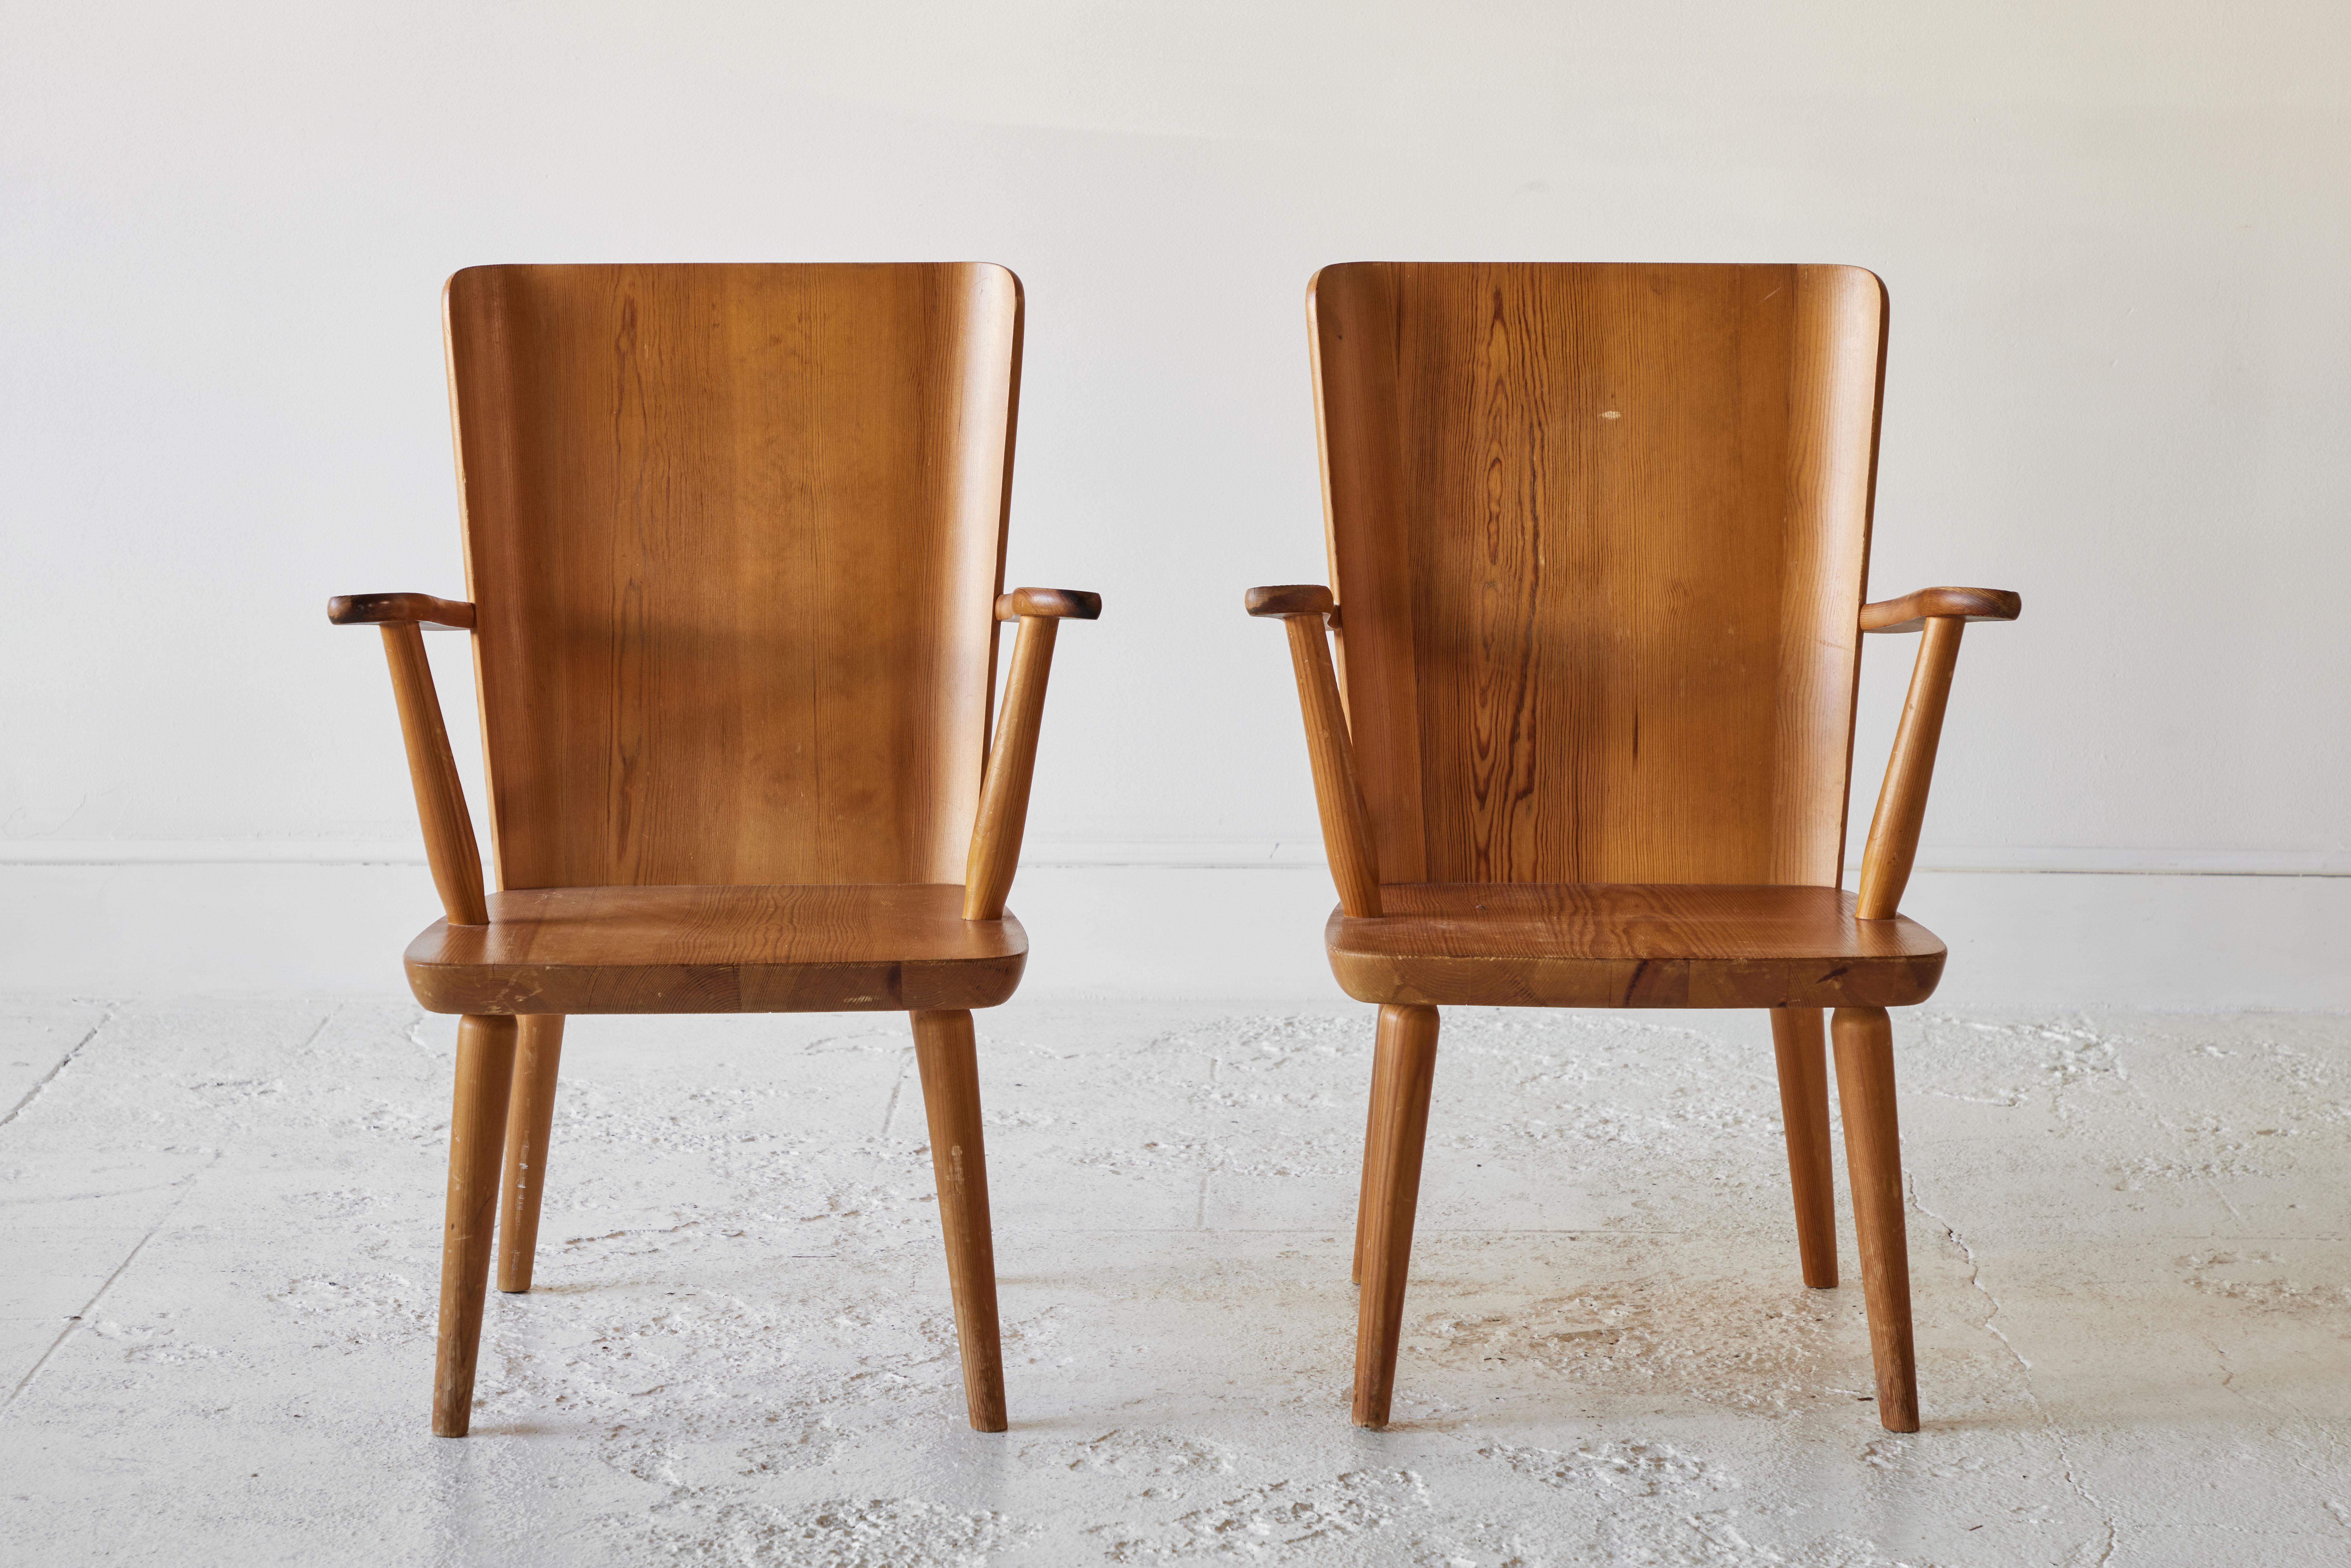 Pair of pine chairs by Göran Malmvall for Karl Andersson & Söner, Sweden, circa 1950s. The set consists of four 510 Svensk Fur chairs in solid pine. These beautiful wooden pieces reflect the manufacturer’s ideal: wood is the foundation. High